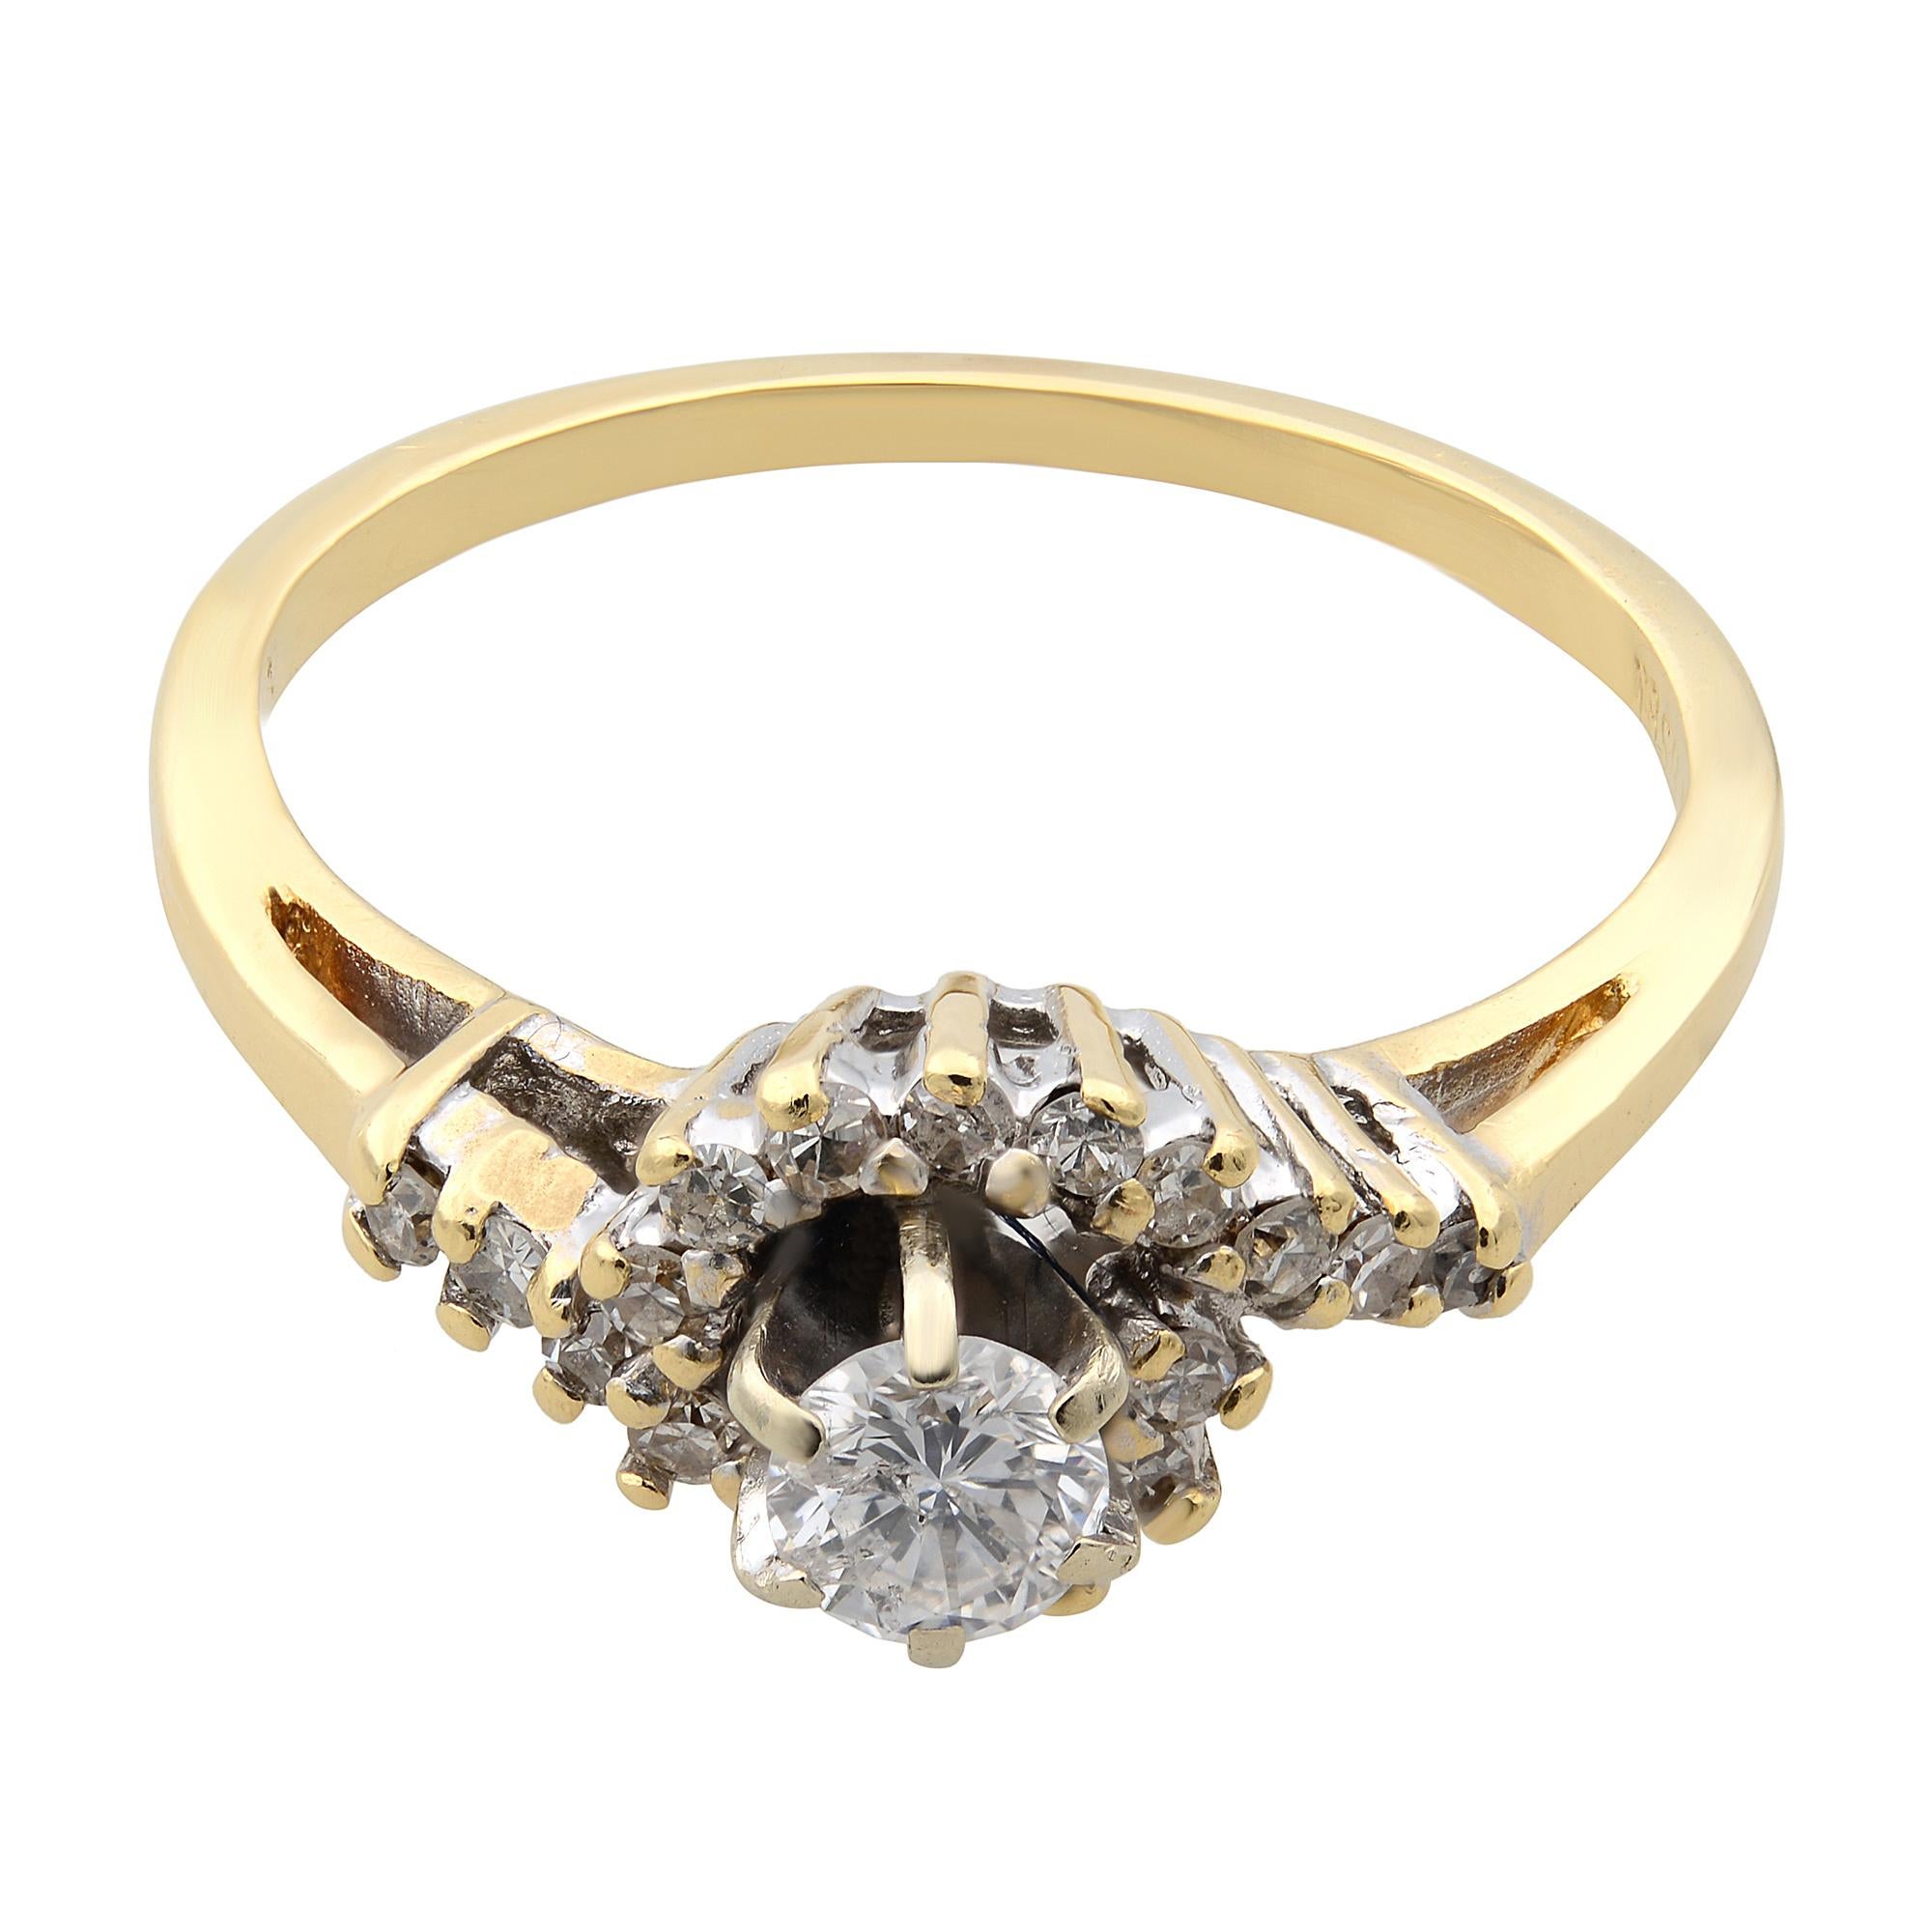 A classic & elegant ring is a perfect gift for any occasion that will surely make a memorable impression. This beautiful ring is crafted in 14k yellow gold with 0.33cttw diamonds. Comes with our elegant jewelry gift box, perfect for any gift-giving